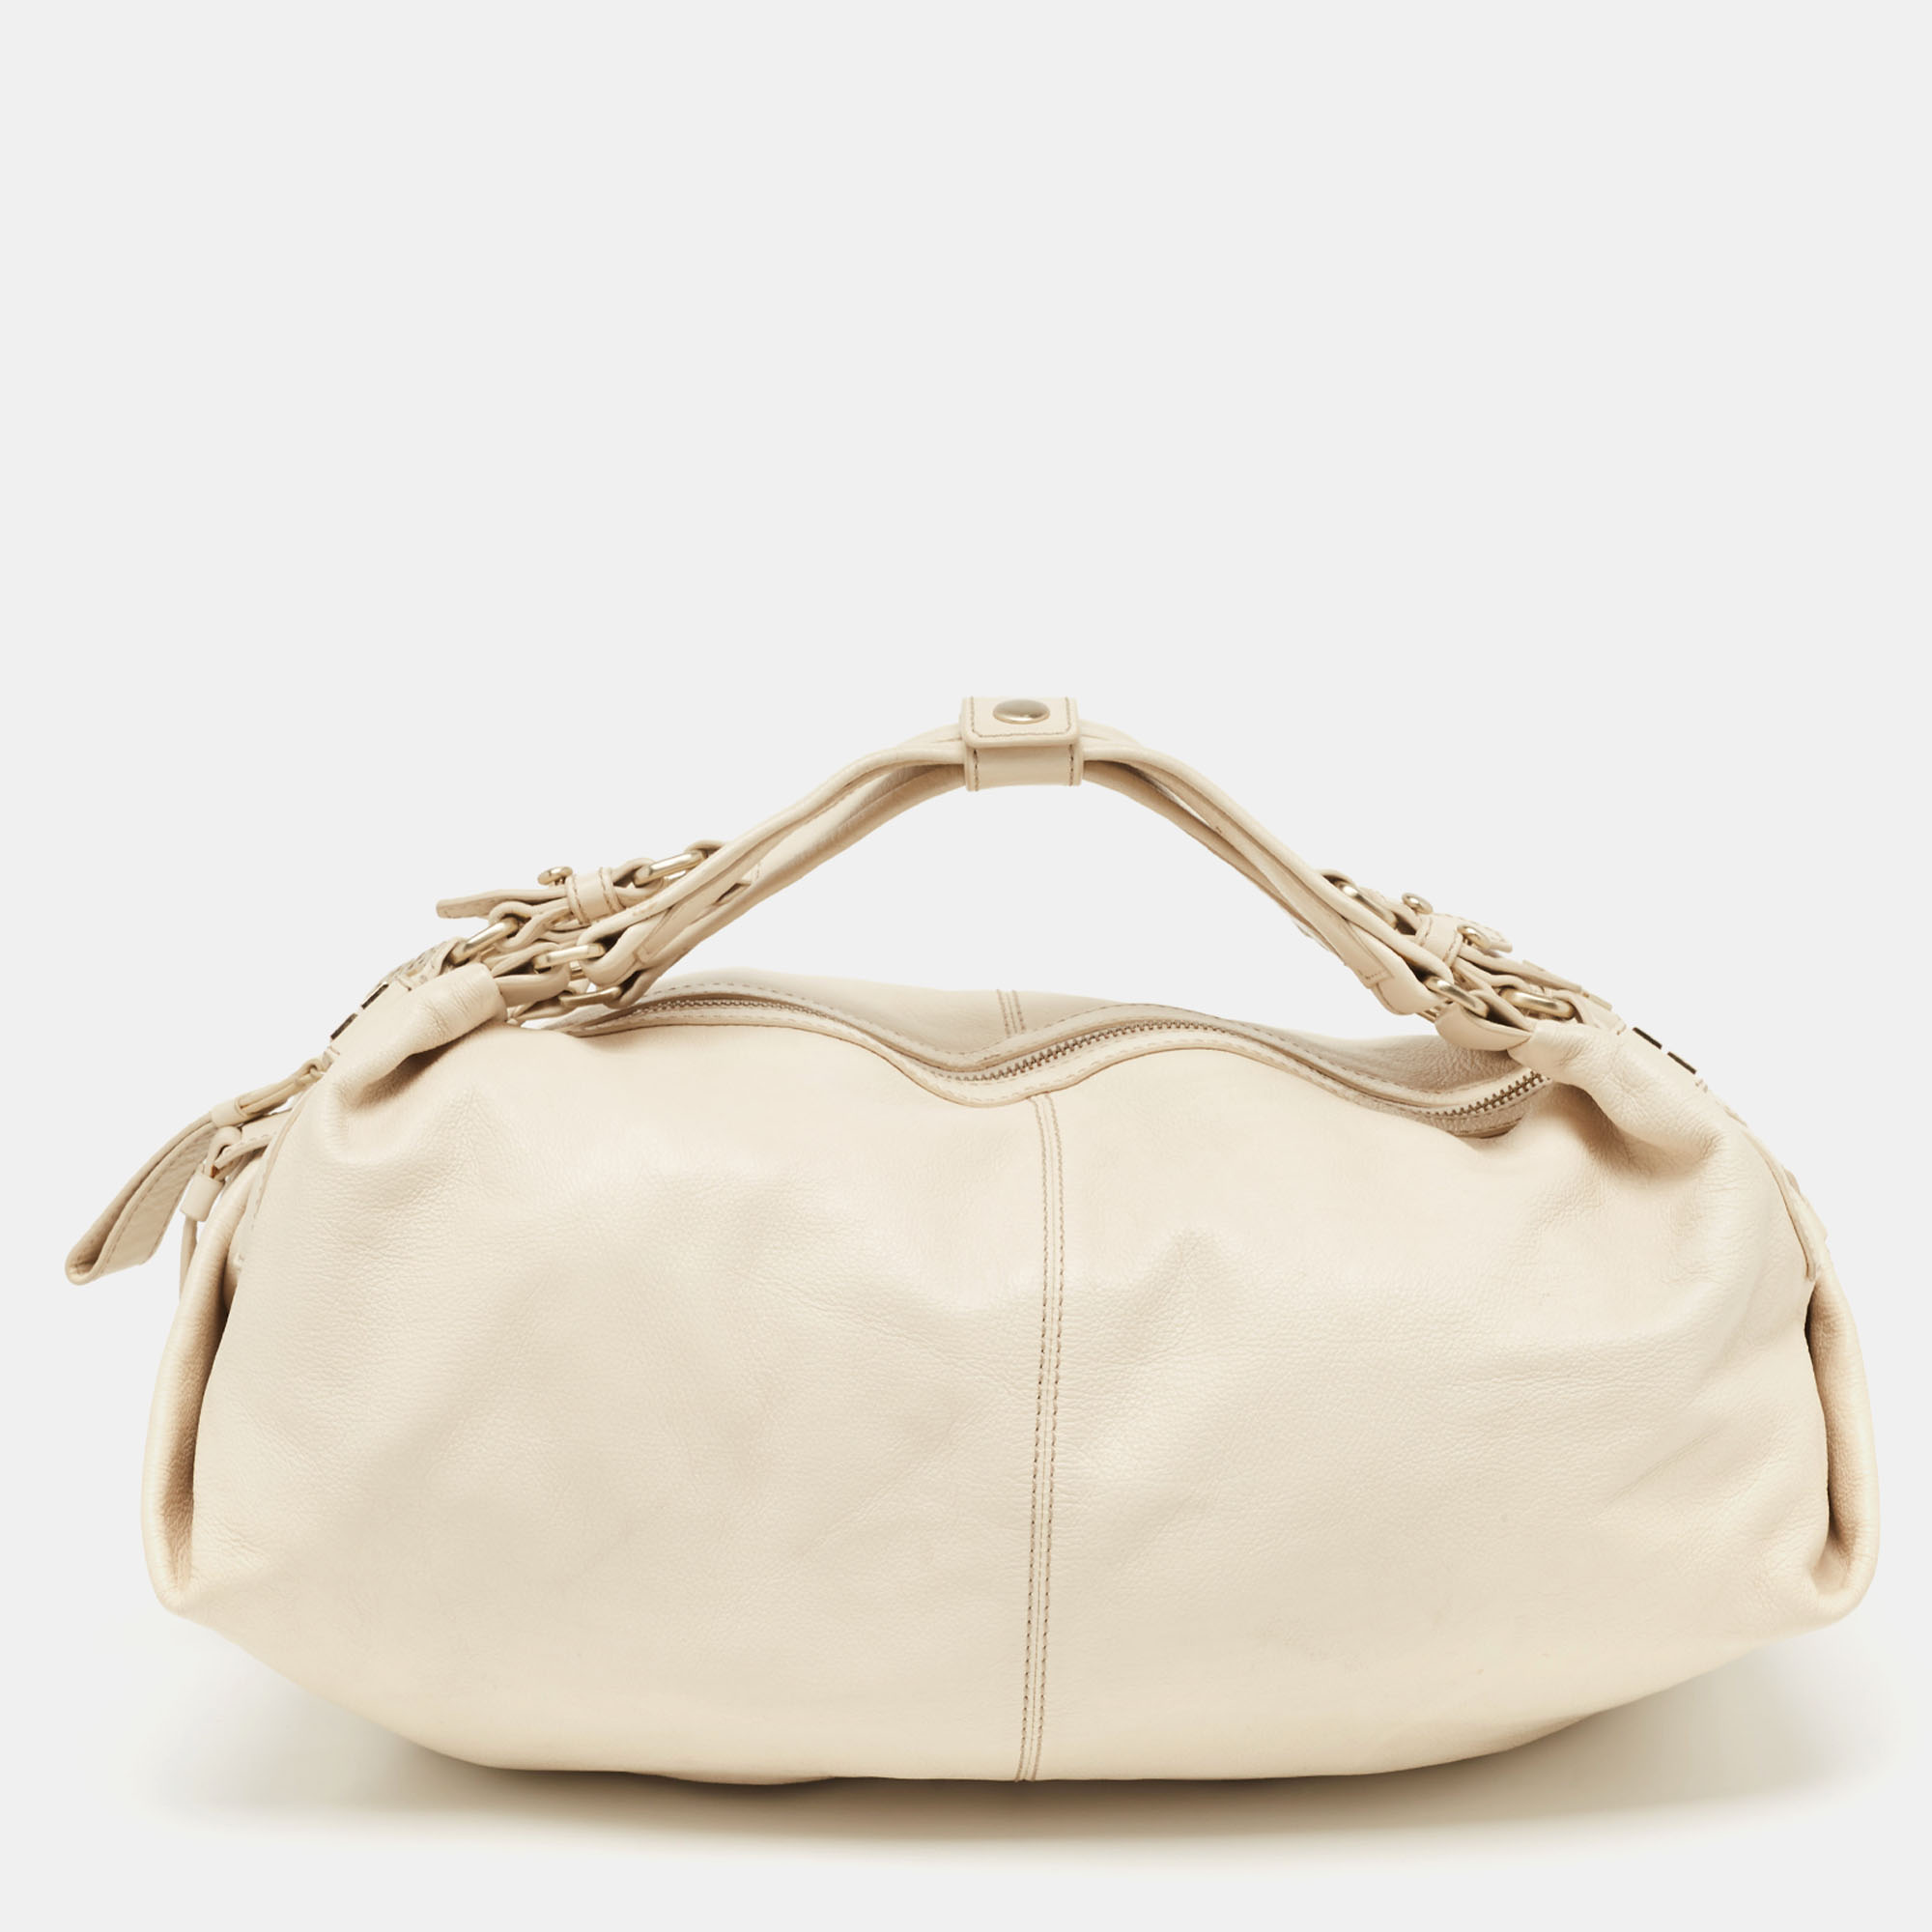 Pre-owned Givenchy Light Beige Leather Double Handle Hobo